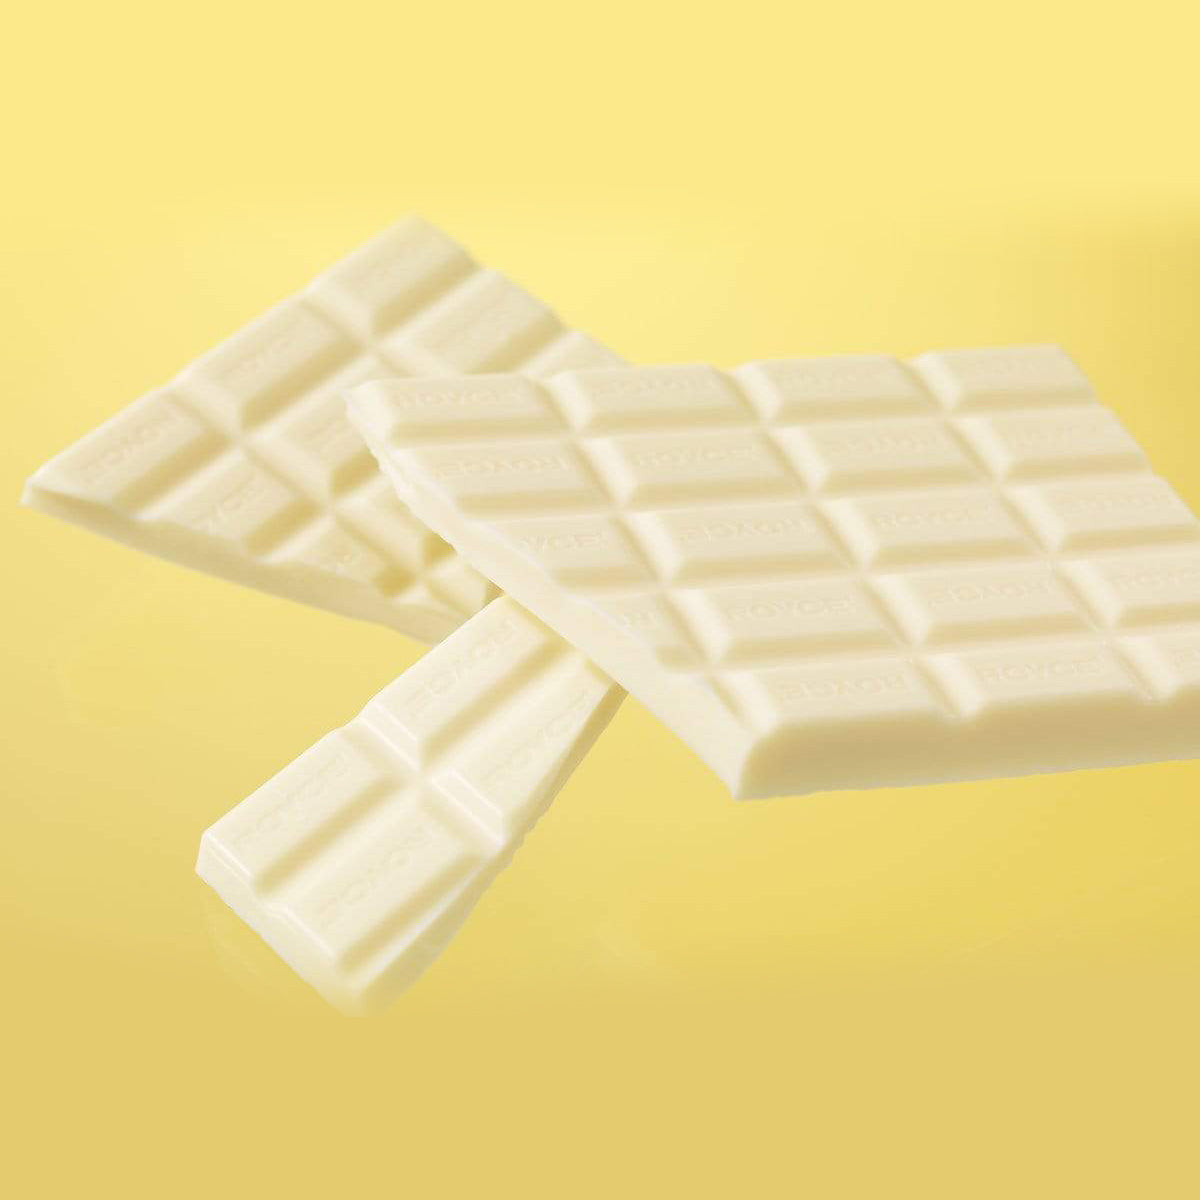 ROYCE' Chocolate - Chocolate Bar "White" - Image shows white chocolate bars and the word "ROYCE'" engraved. Background is in yellow.